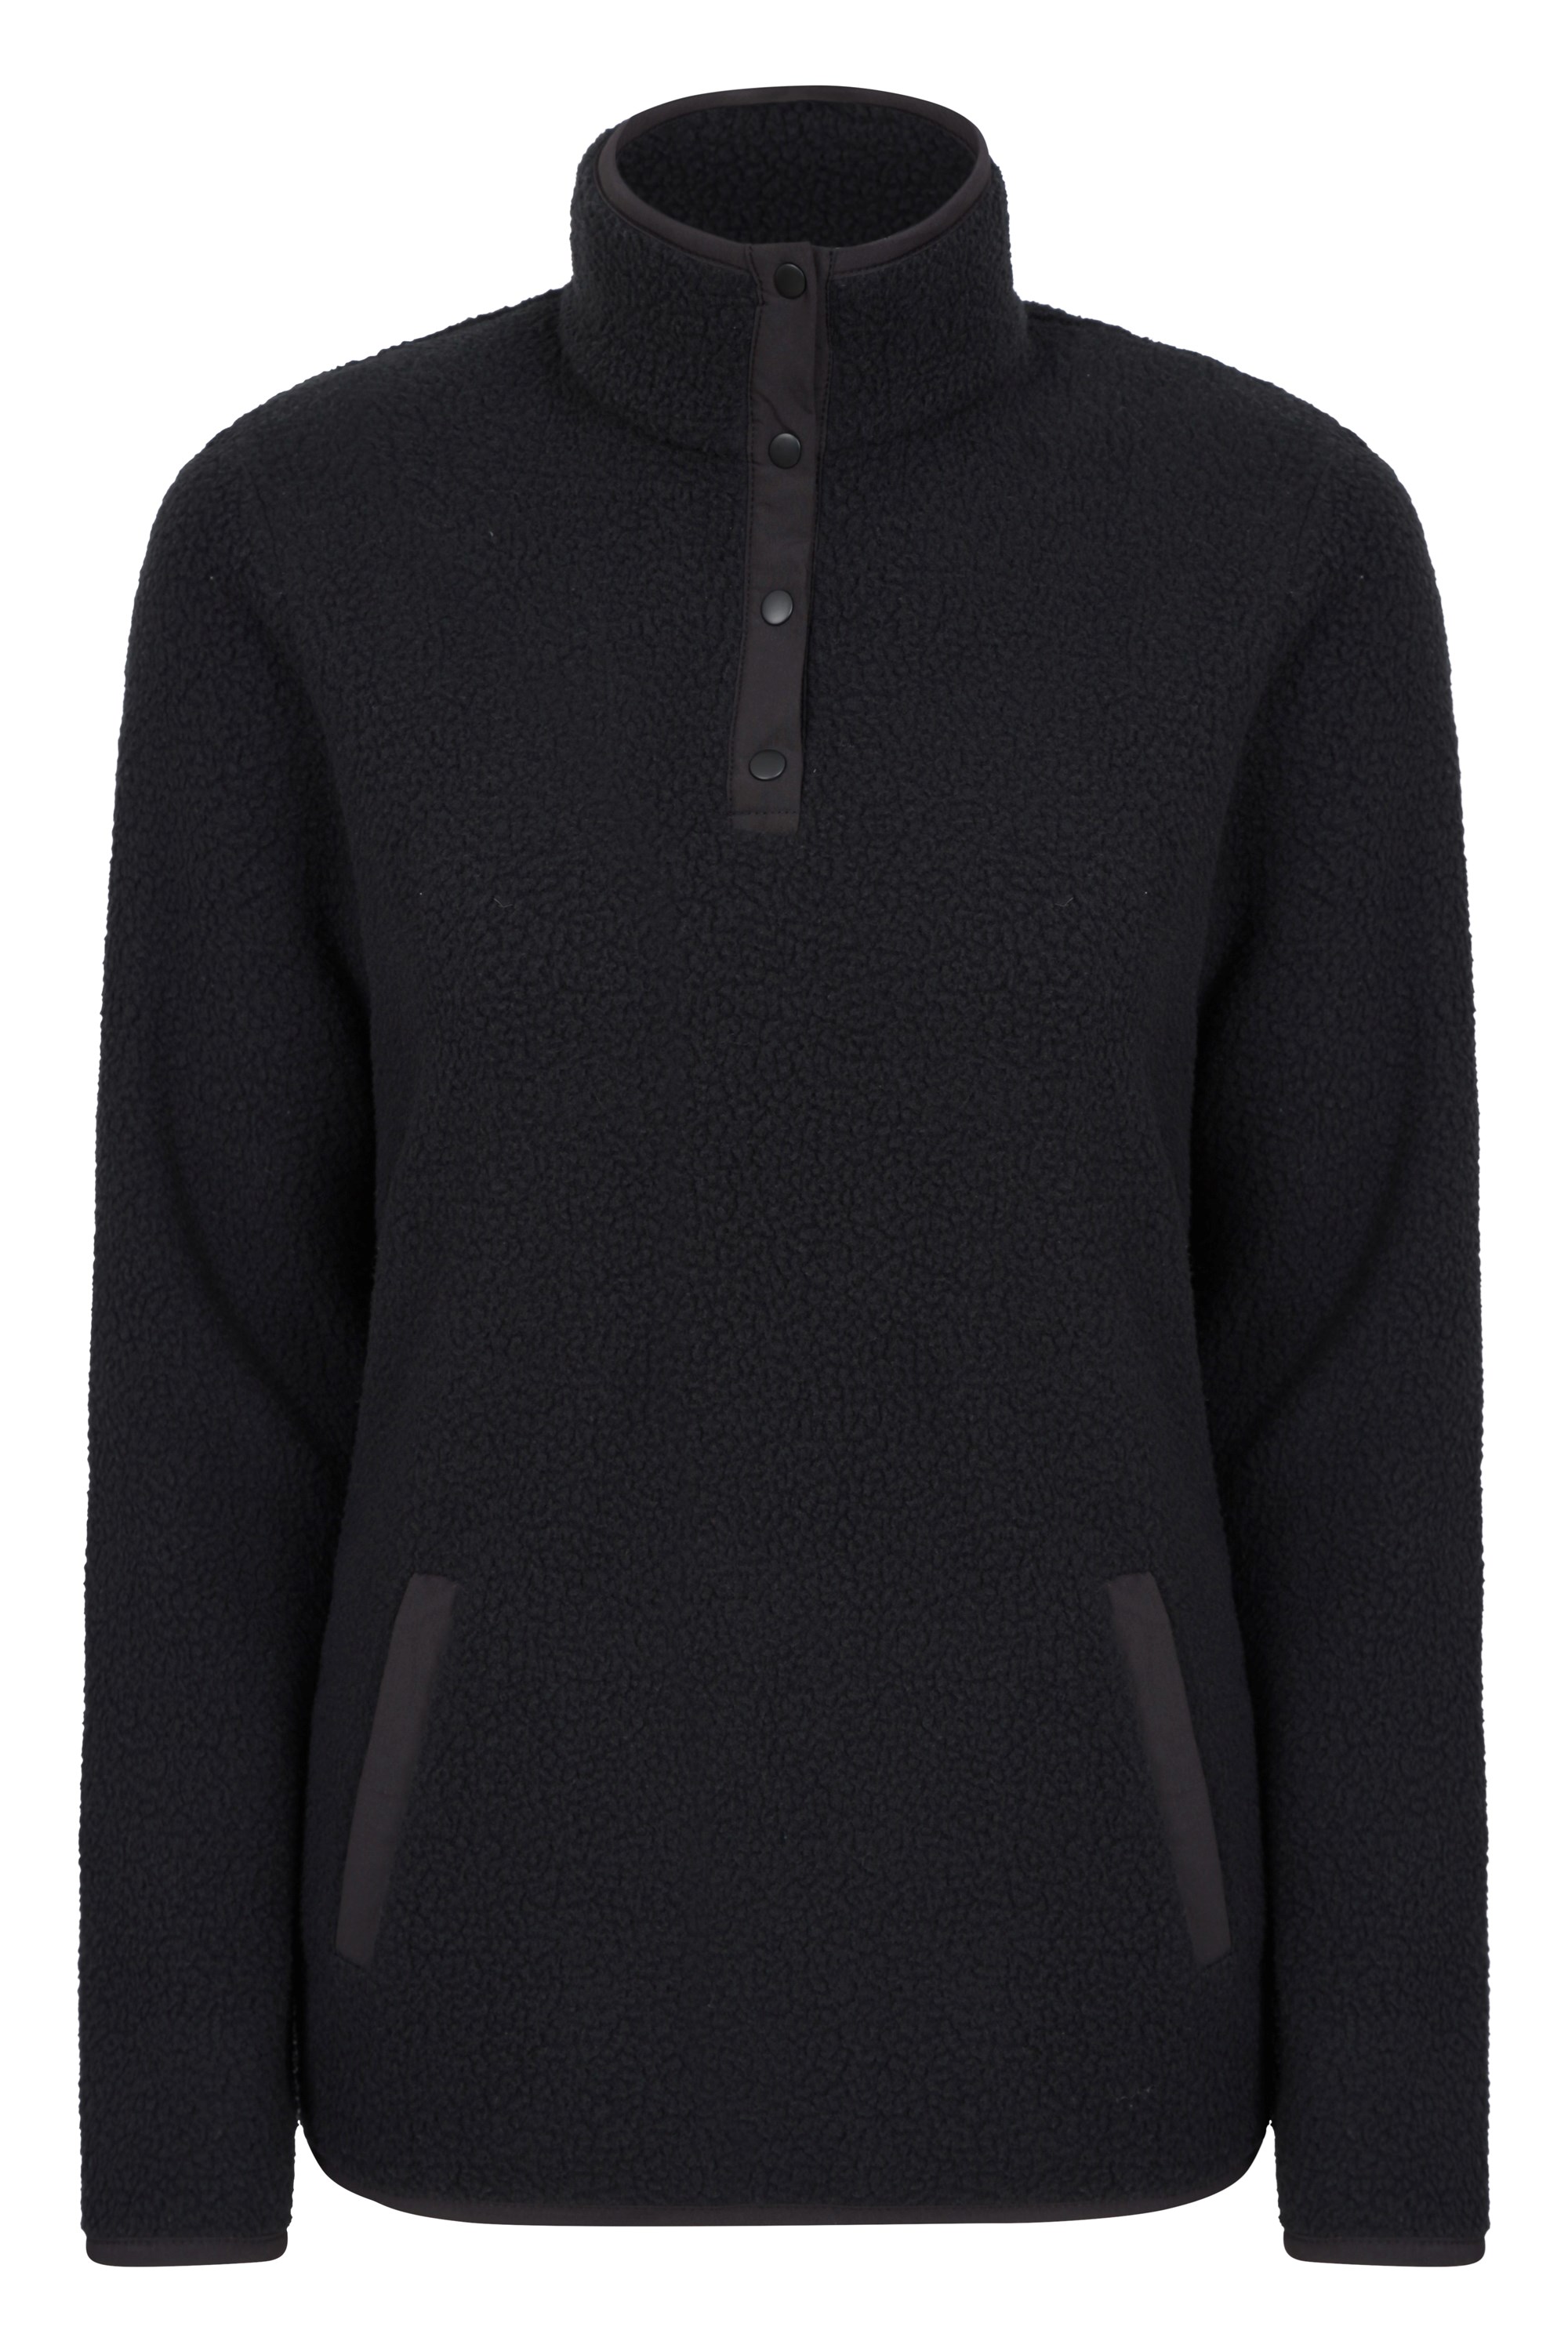 Mono B KT-A097 Fleece Lined Rolled Neck Pullover - Music Collection and  Dance Corner Canada, Canada, Newfoundland, NL